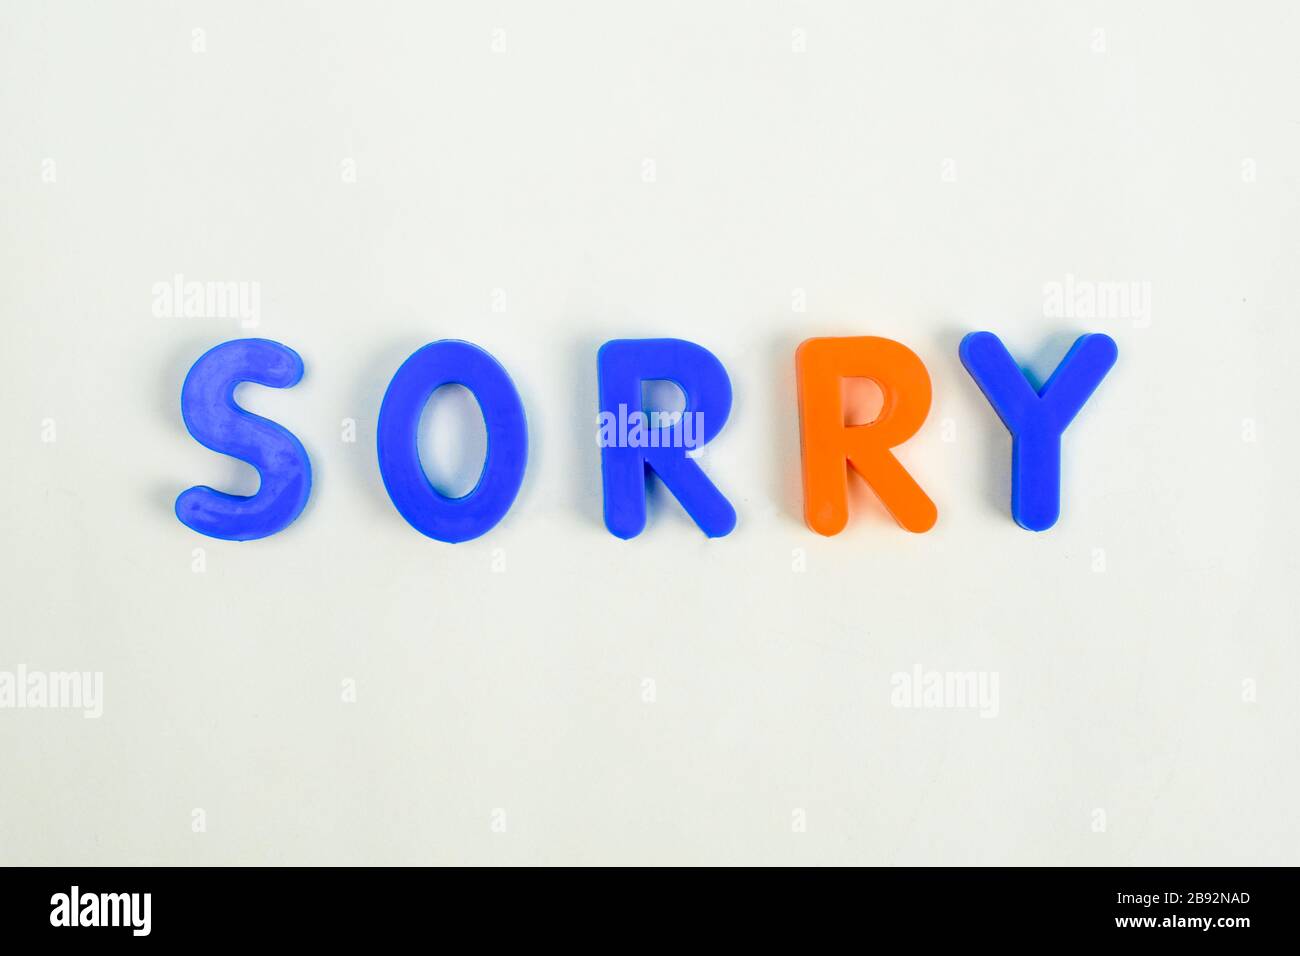 Sorry written in different colored letter blocks on an isolated white background Stock Photo